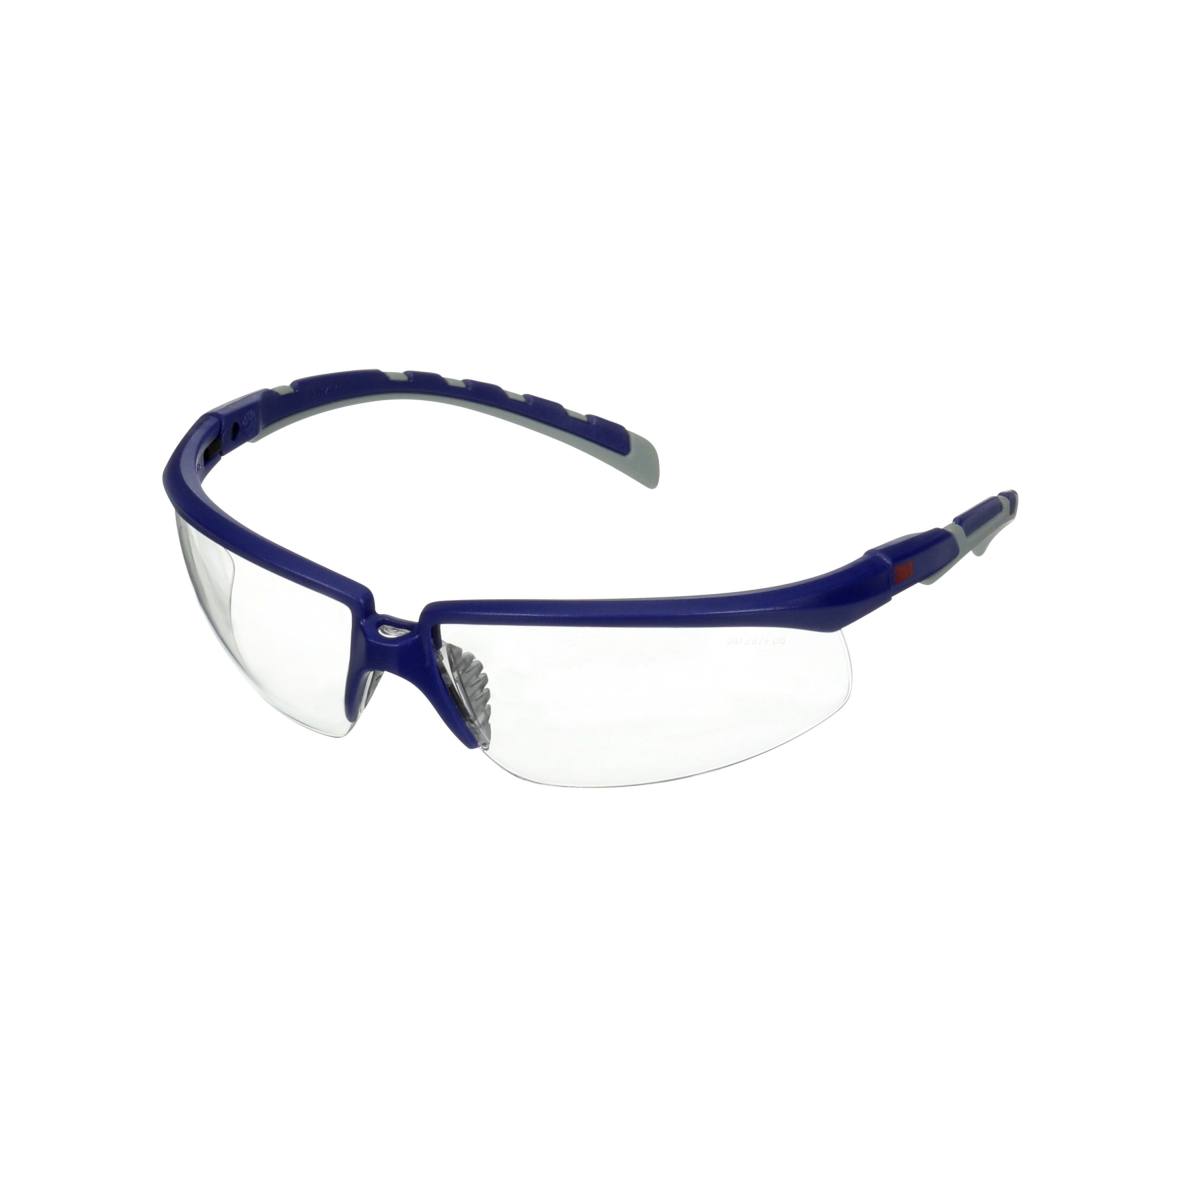 3M Solus 2000 safety spectacles, blue/grey temples, scratch-resistant+ (K), clear lens, angle-adjustable, S2001ASP-BLU-EU